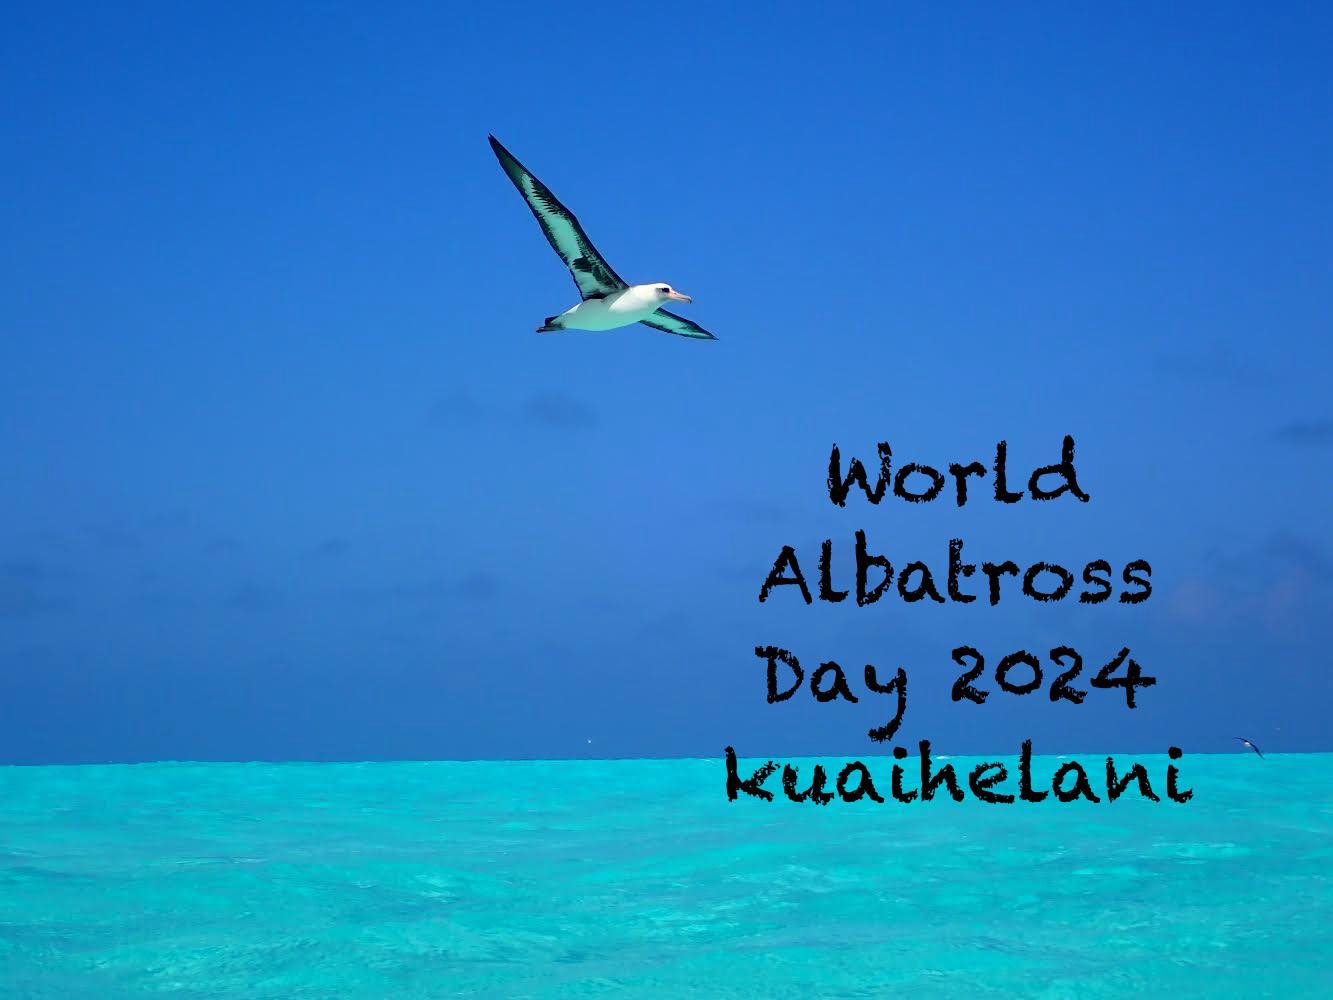 Photo by USFWS Volunteer Keelee Martin on behalf of the Friends of Midway Atoll